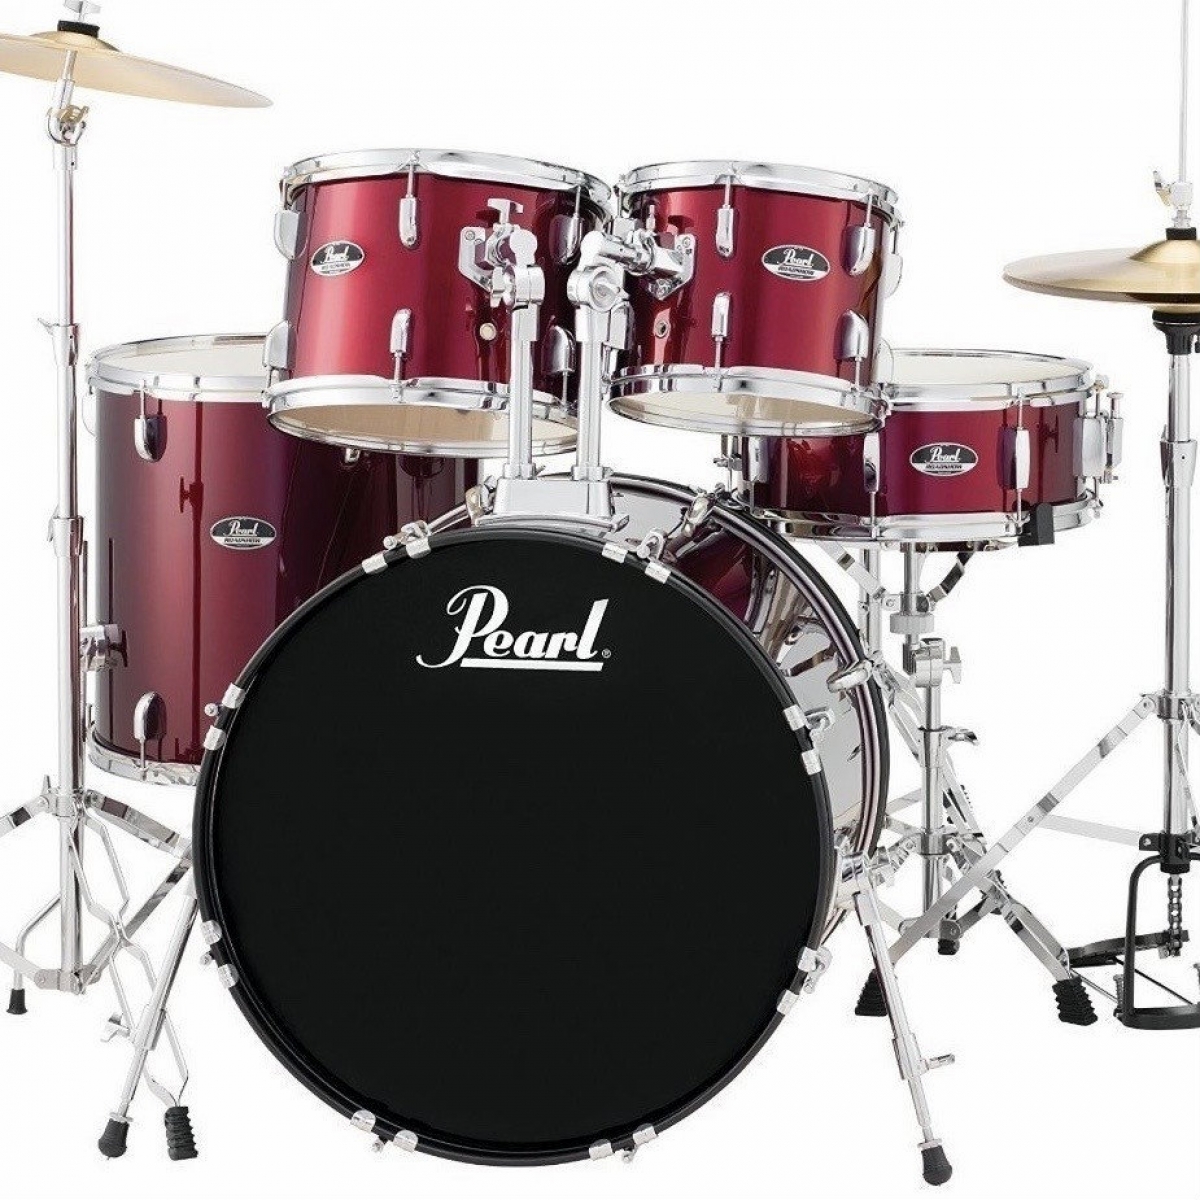 Pearl Roadshow Jazz / Junior 18 Kit in Wine Red With Hardware